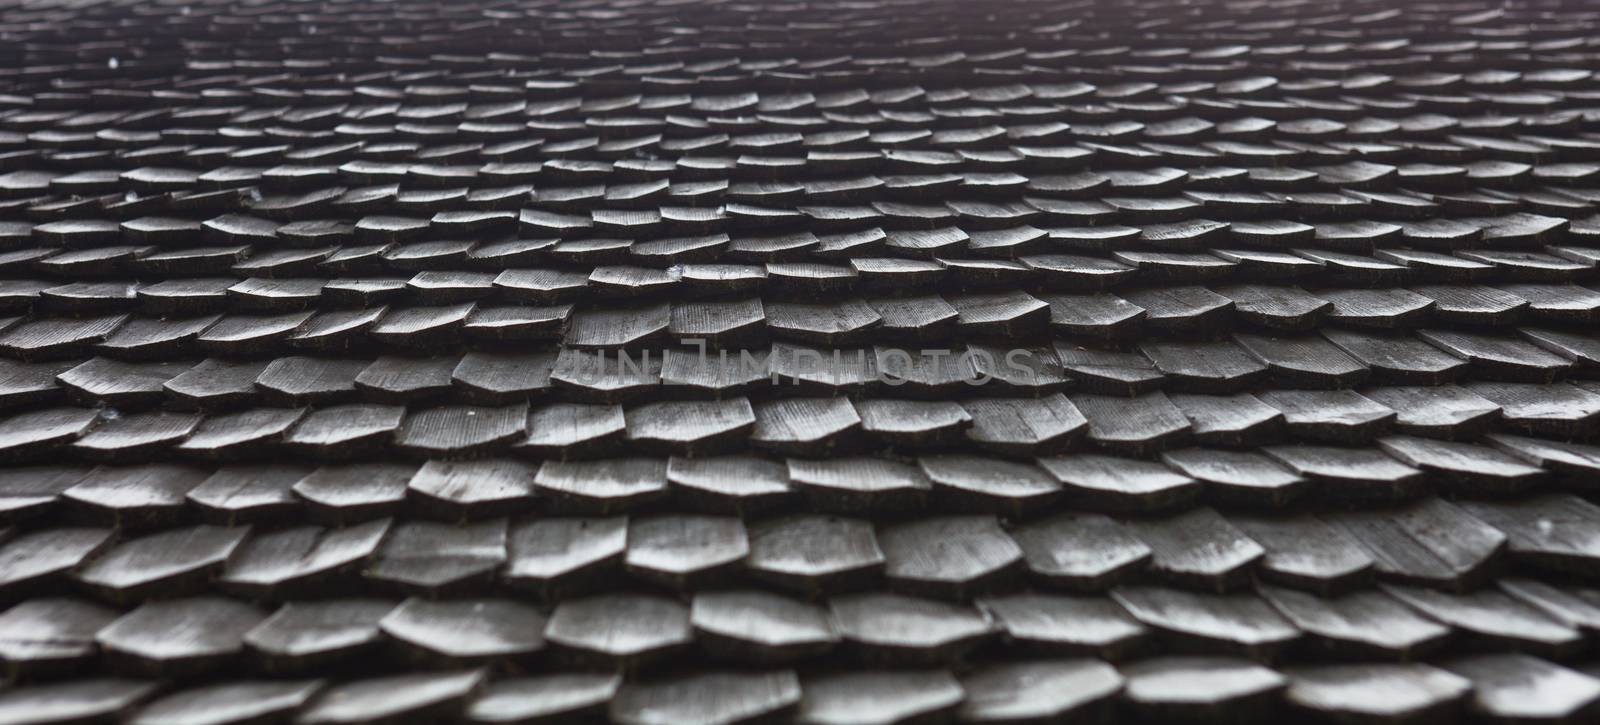 Old wooden shingle roof. Wooden surface texture.